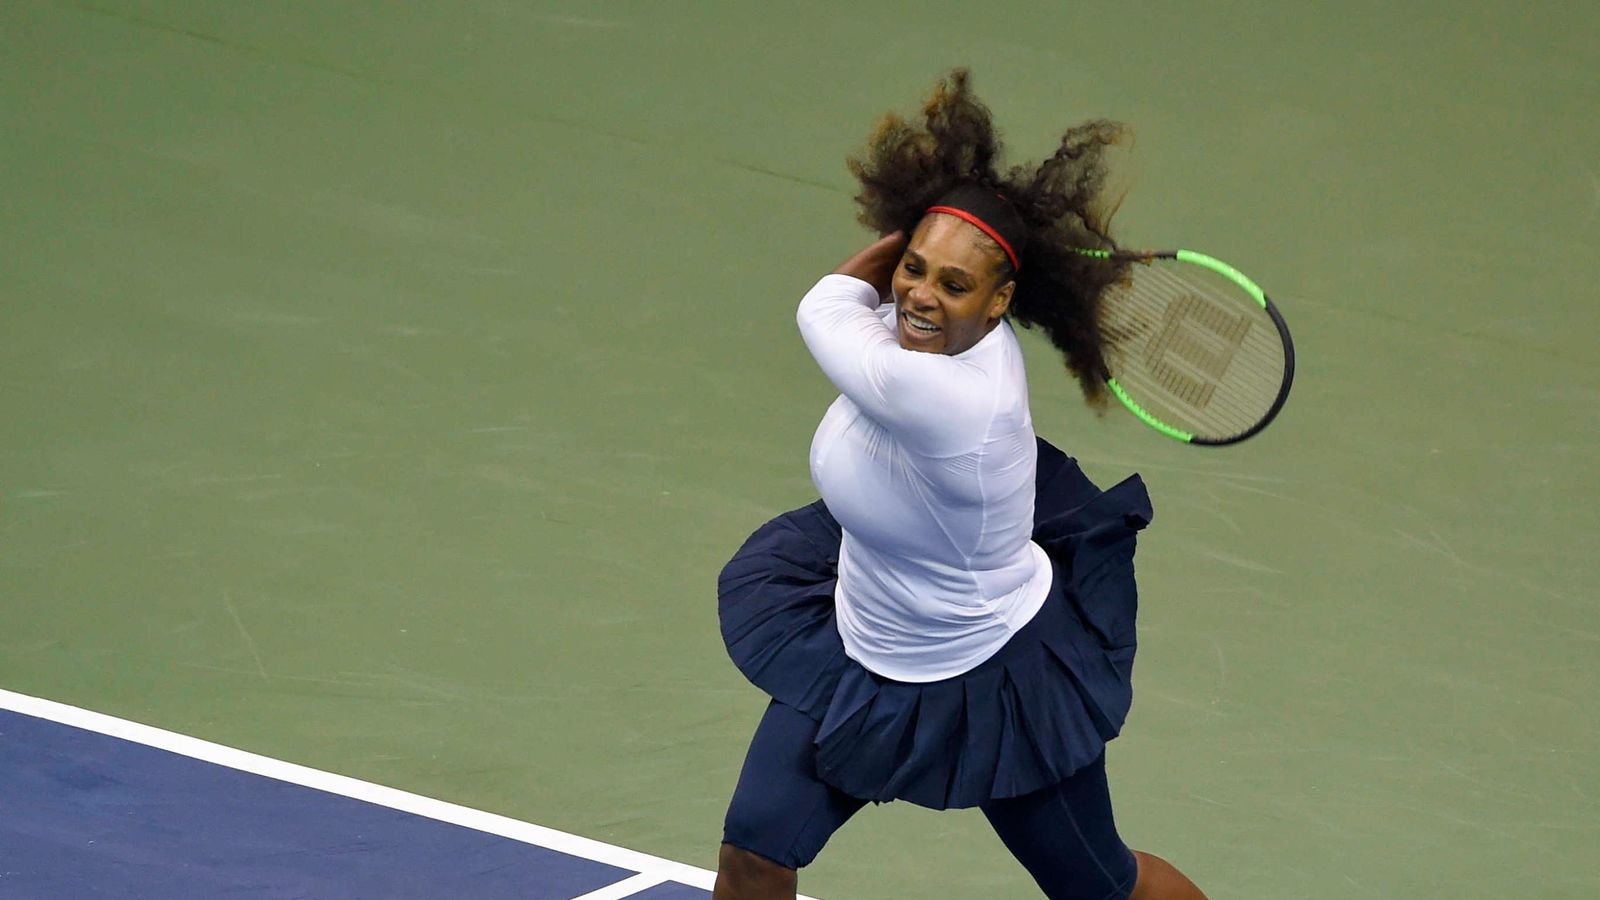 Serena Williams back on court with sister Venus after pregnancy break | US News | Sky News1600 x 900